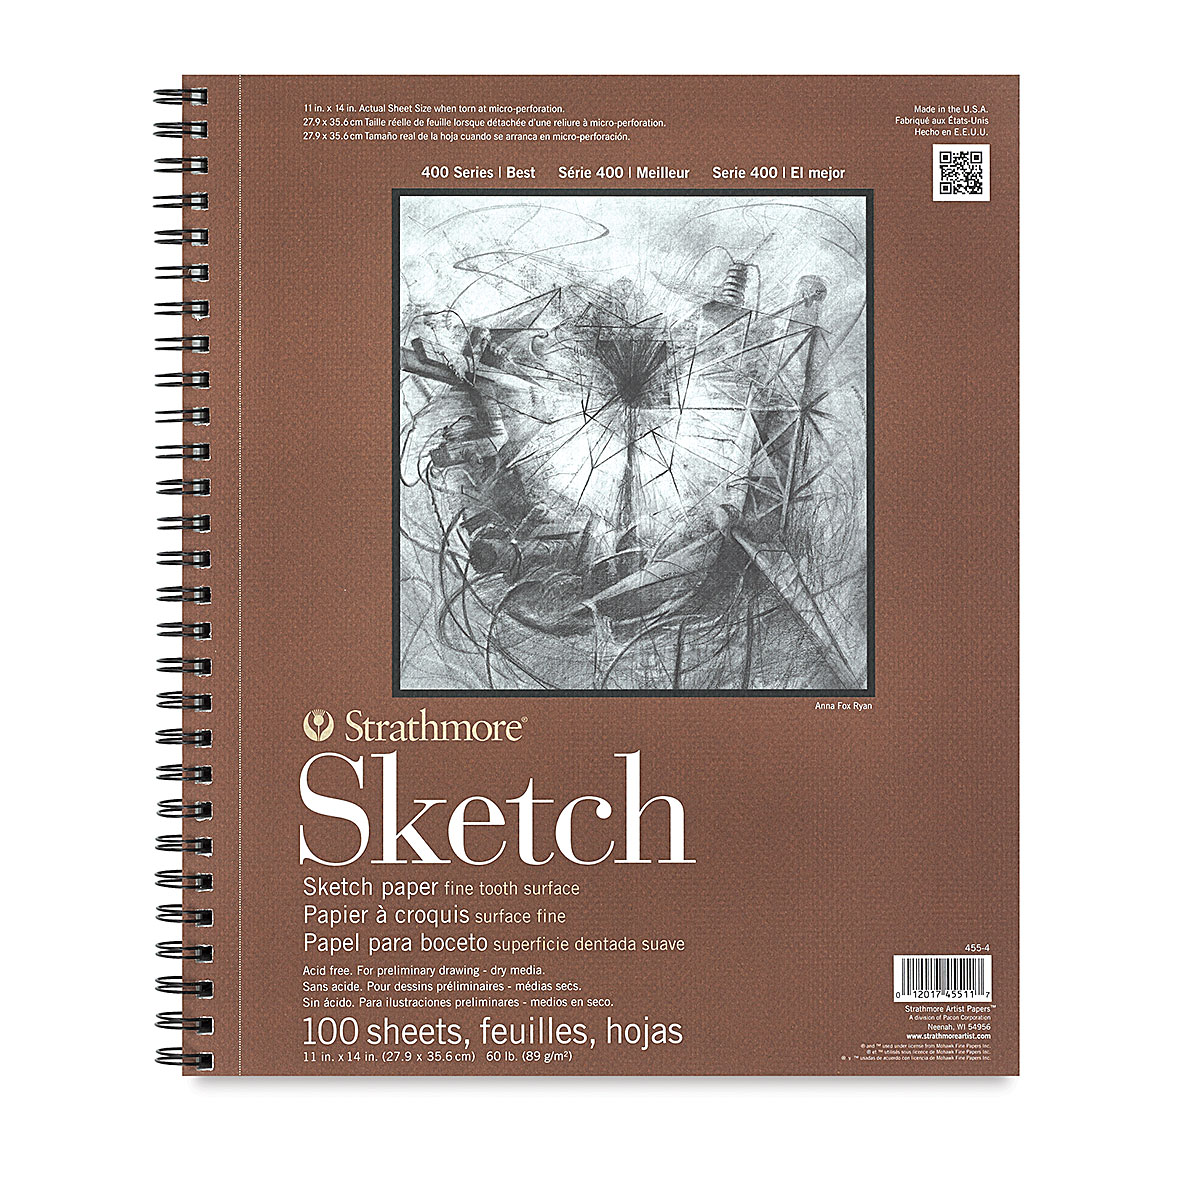 Strathmore 400 Series Recycled Sketch Pad, 100 Sheets 11x14